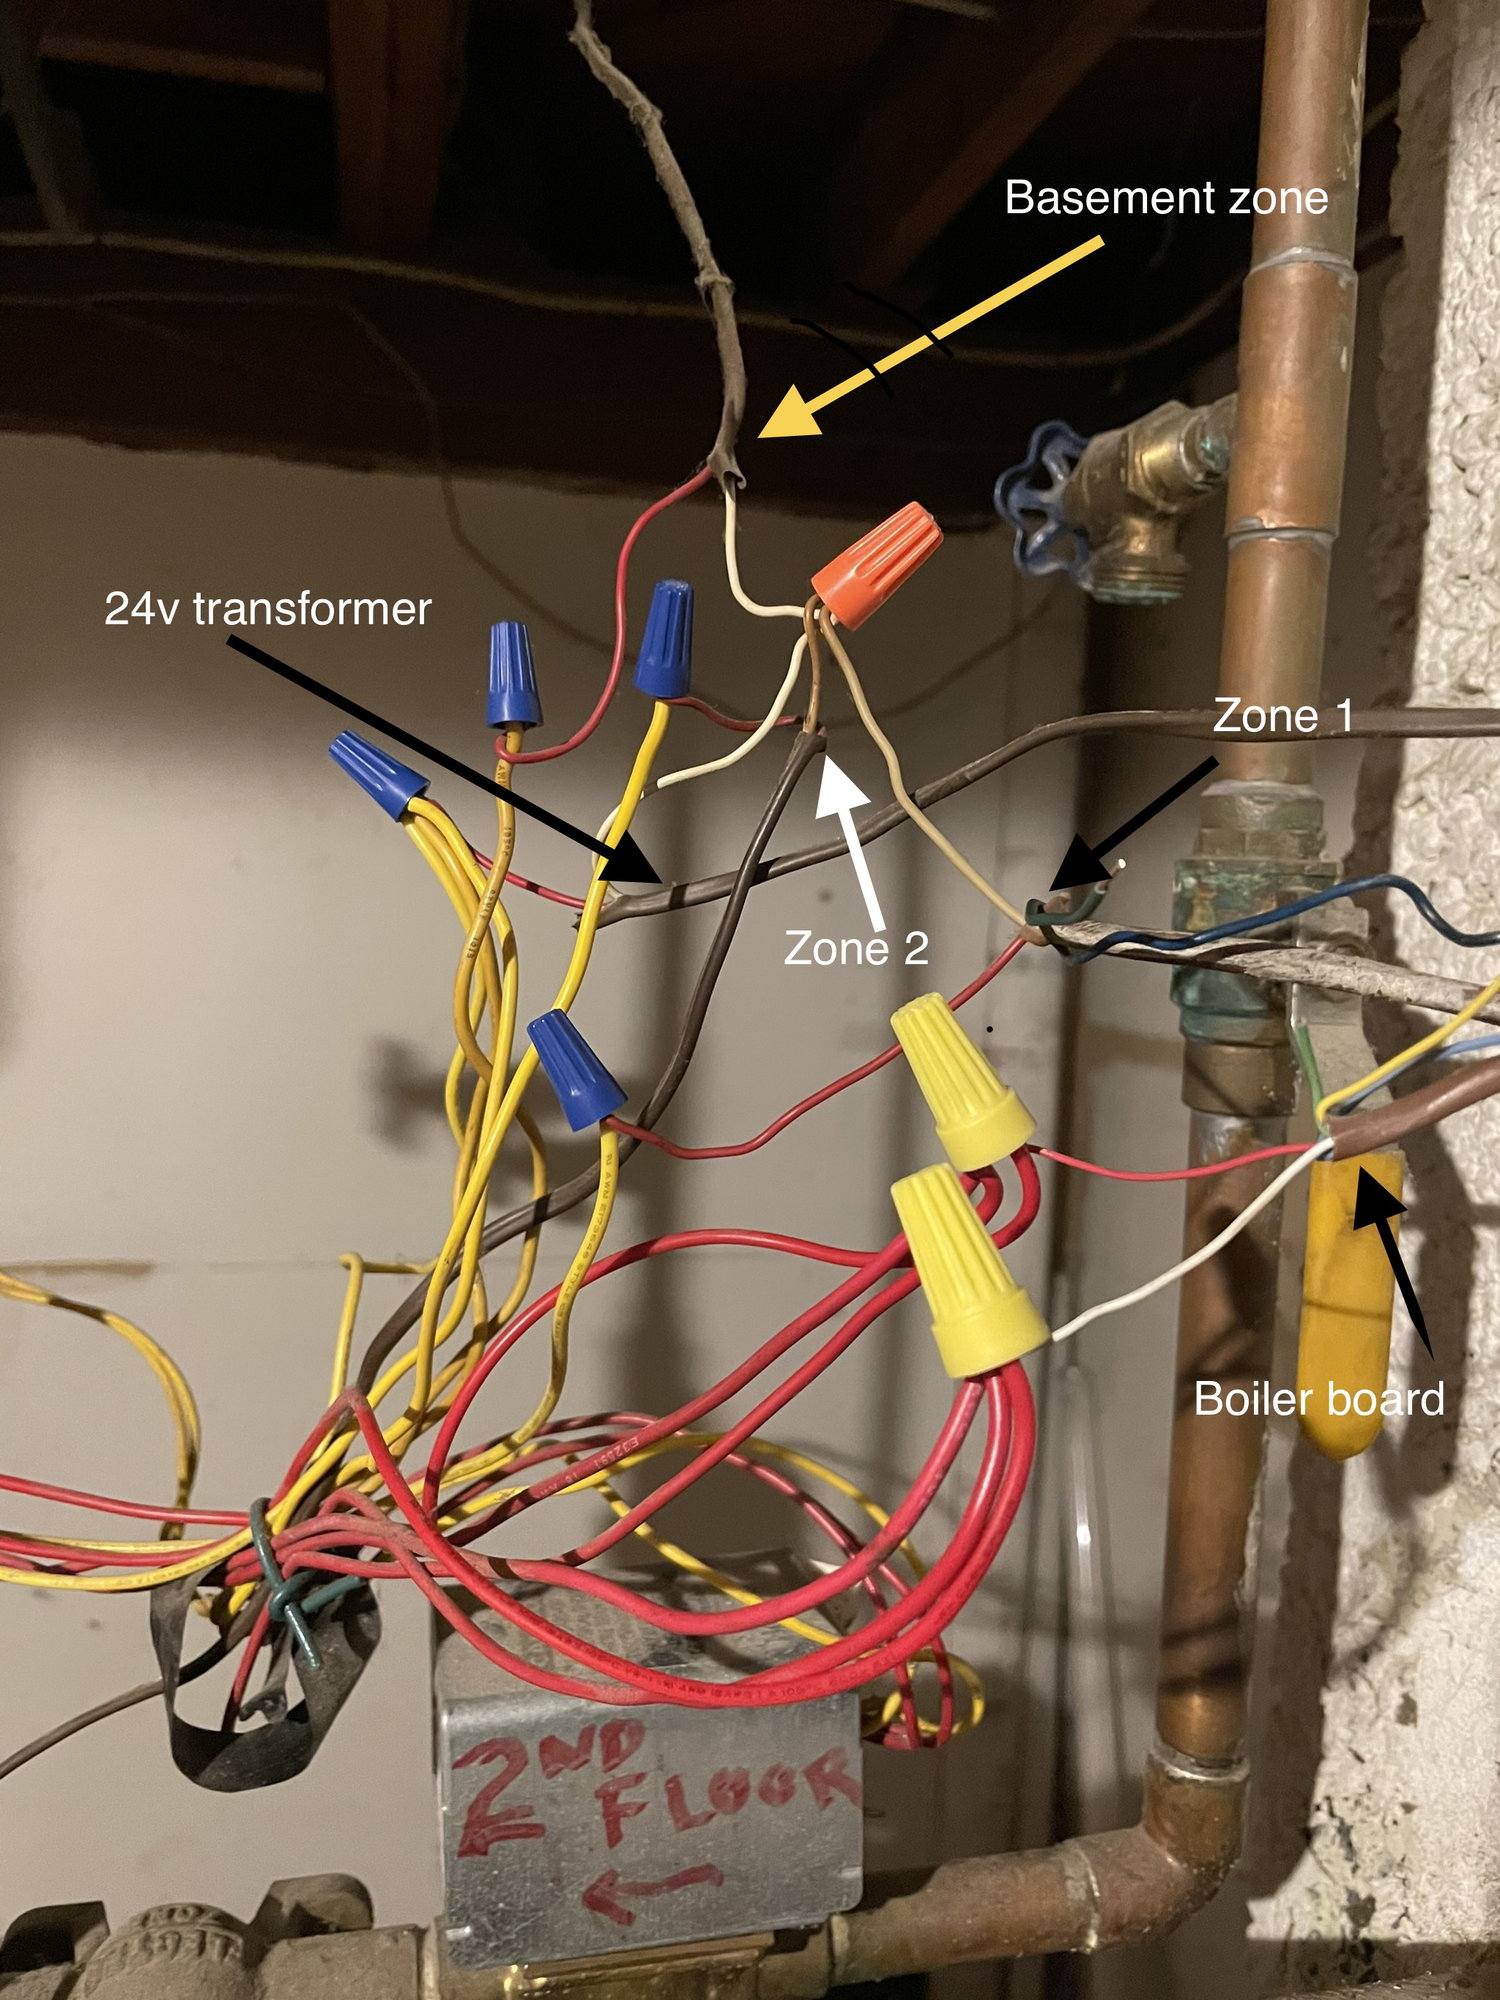 Google Nest Thermostat With Hydronic